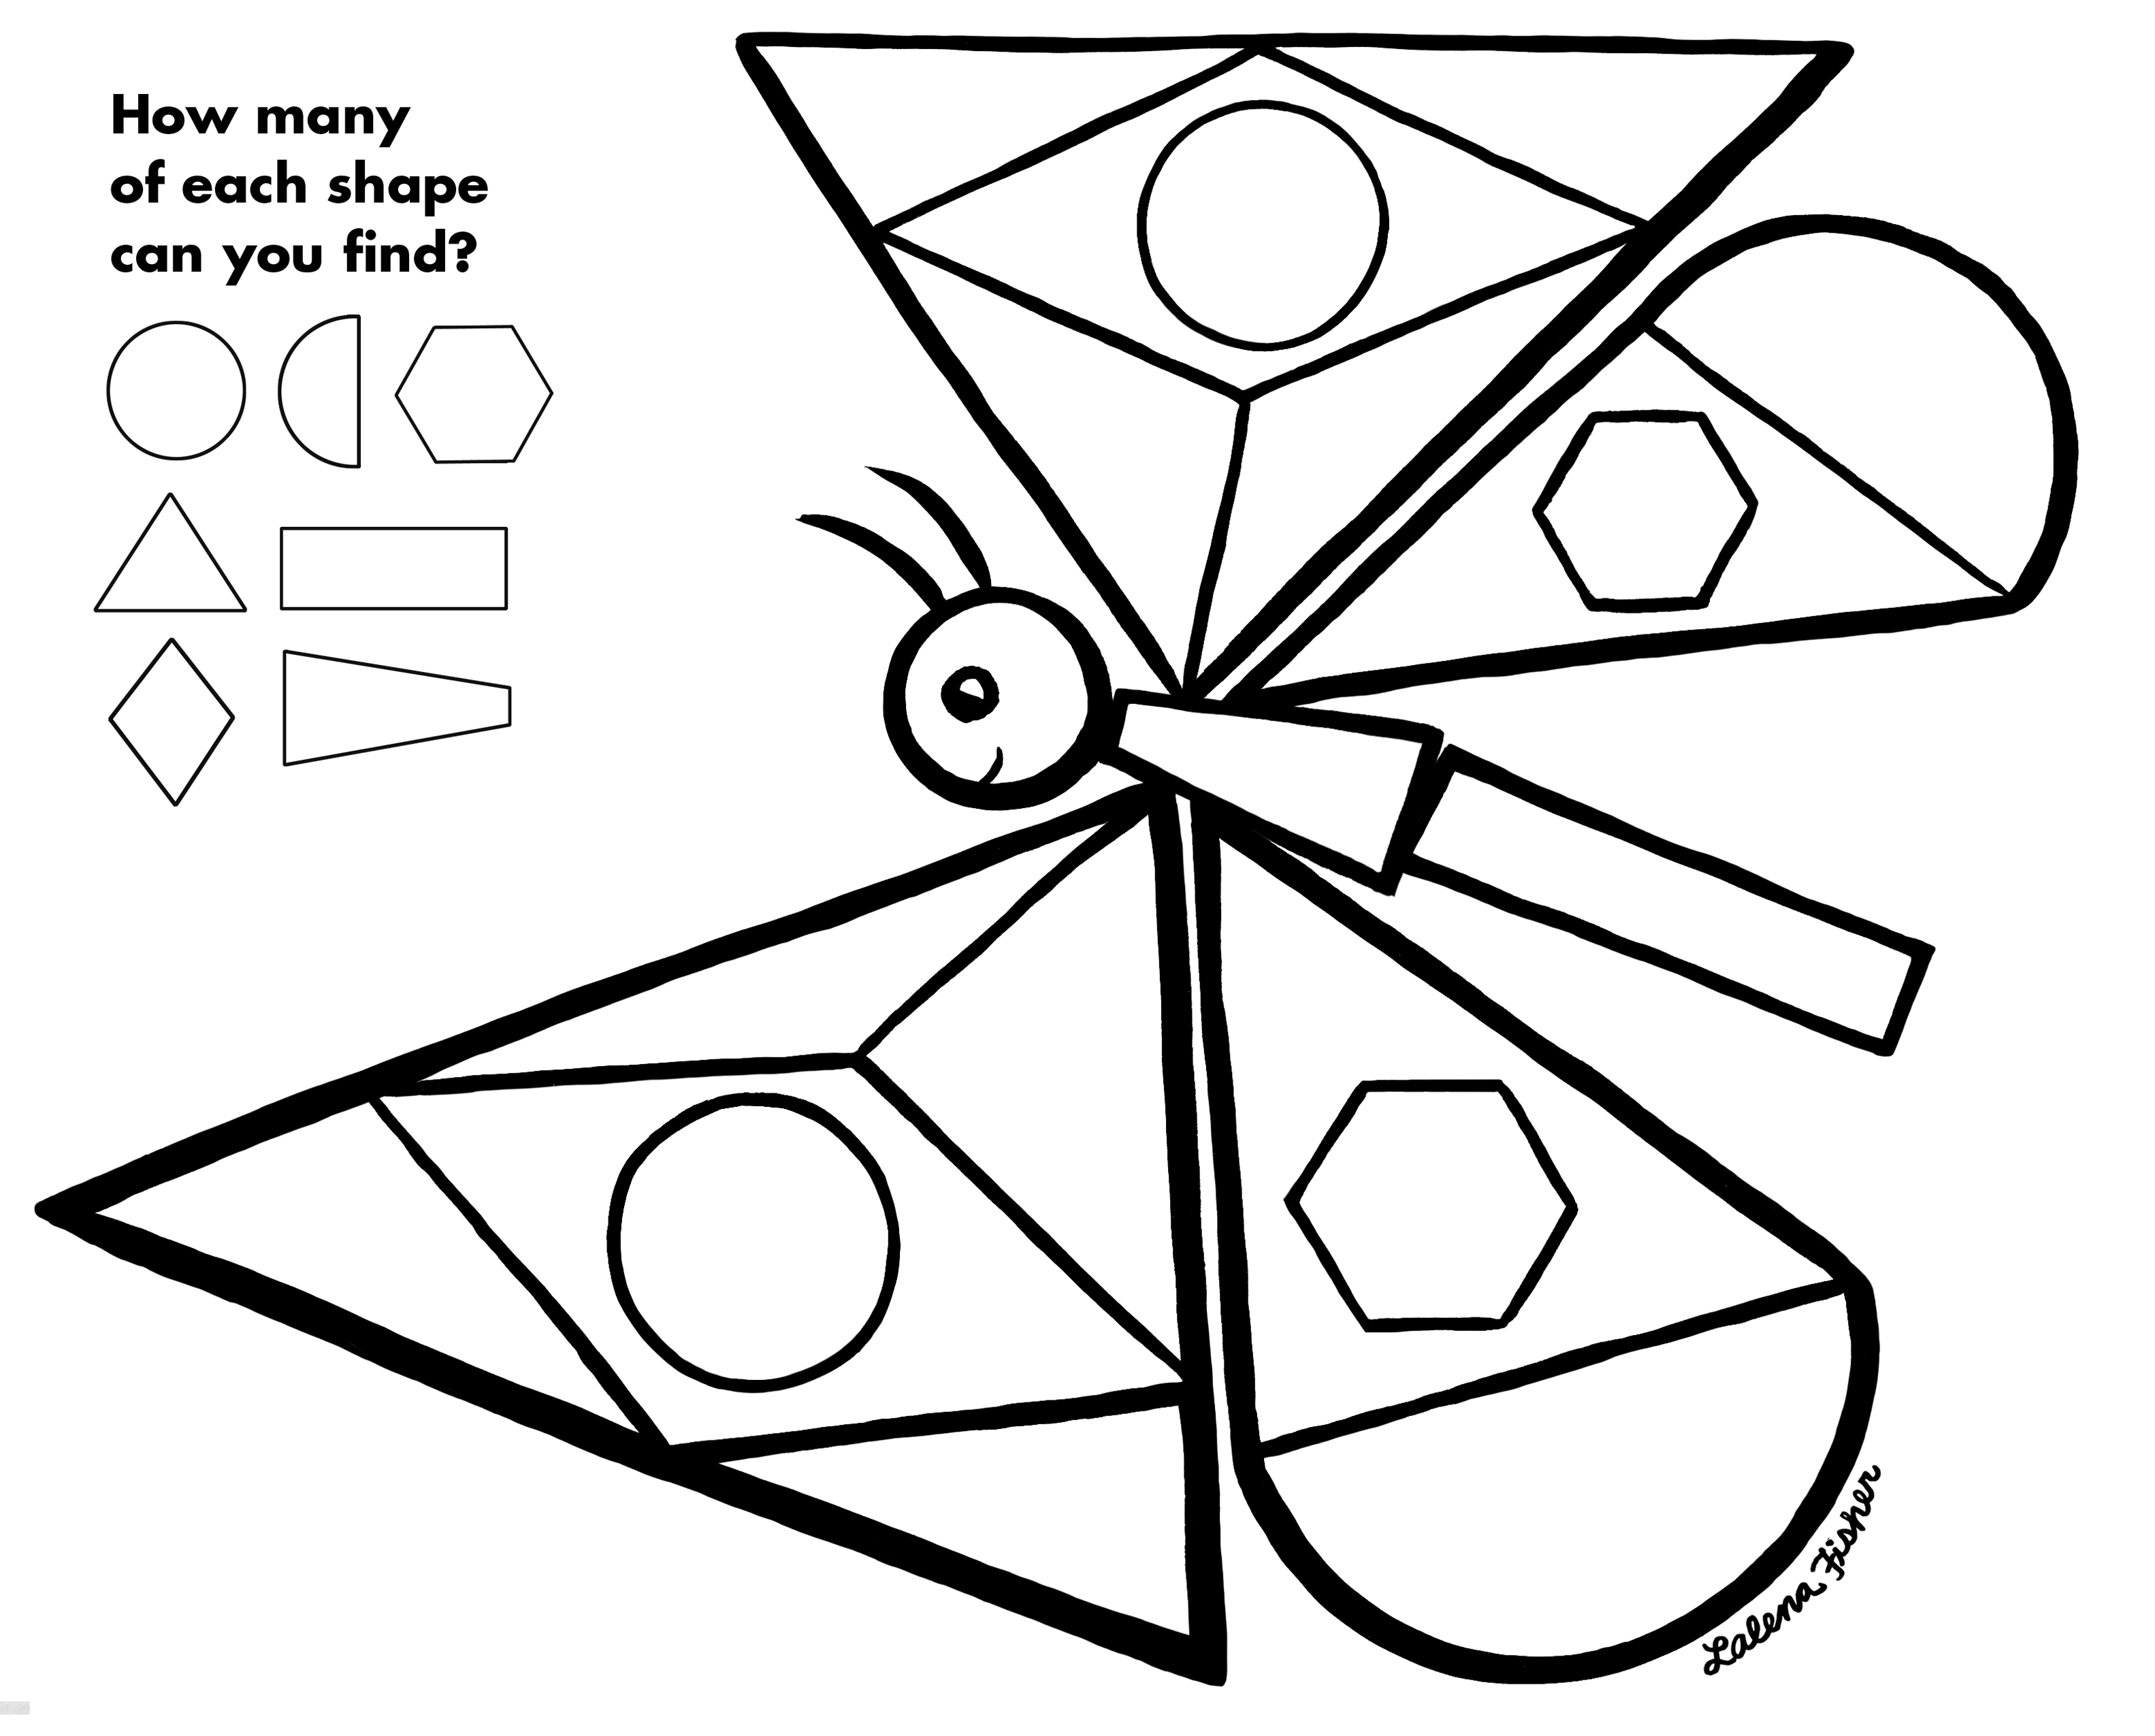 Geometrical Shapes Drawing at GetDrawings.com | Free for personal use